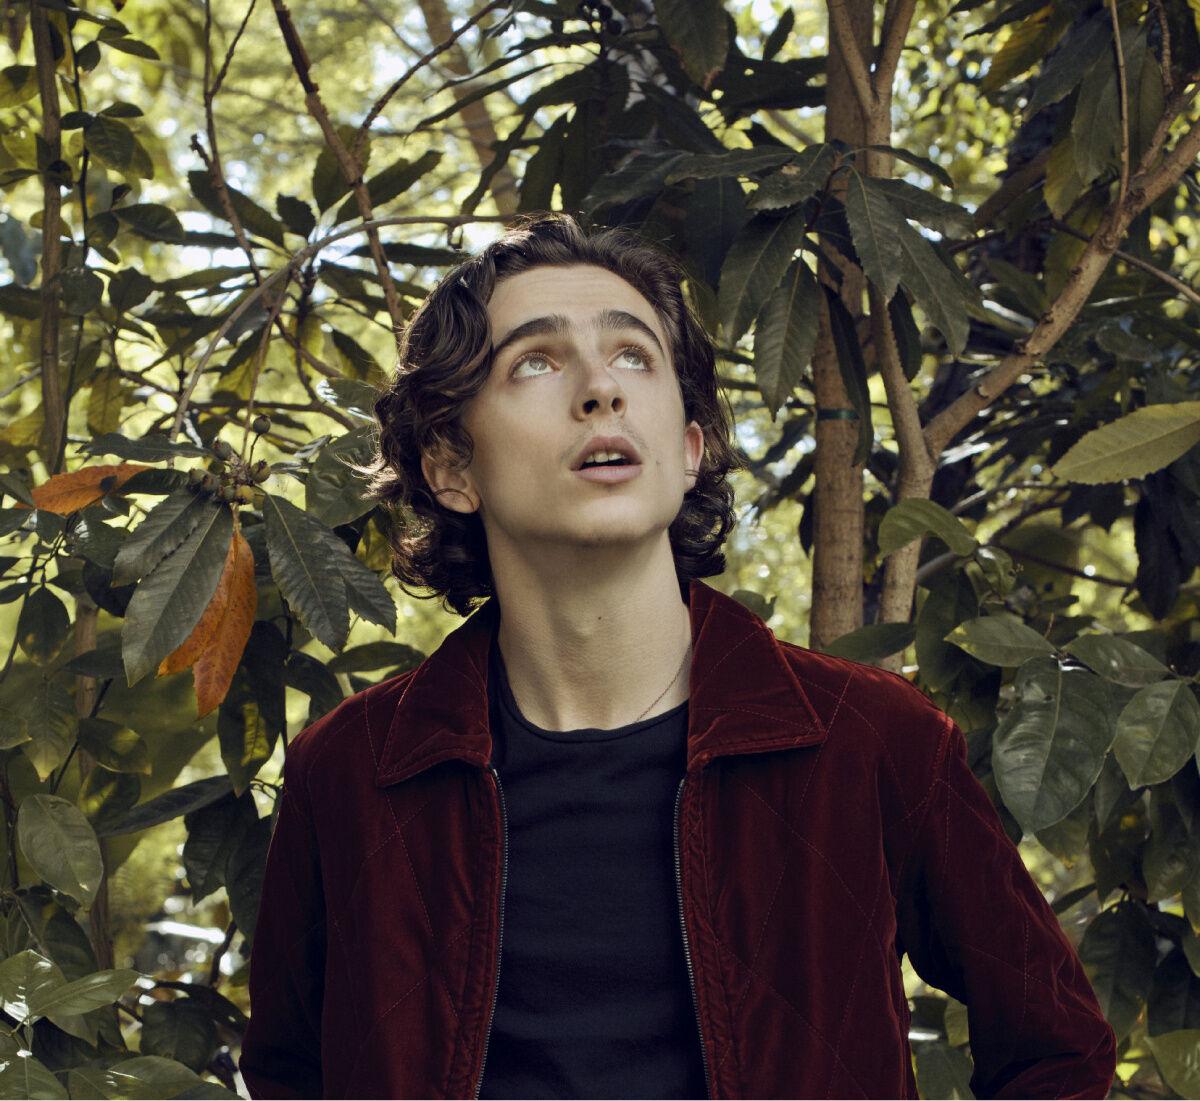 Timothée Chalamet delivers outstanding performance in 'Call Me by